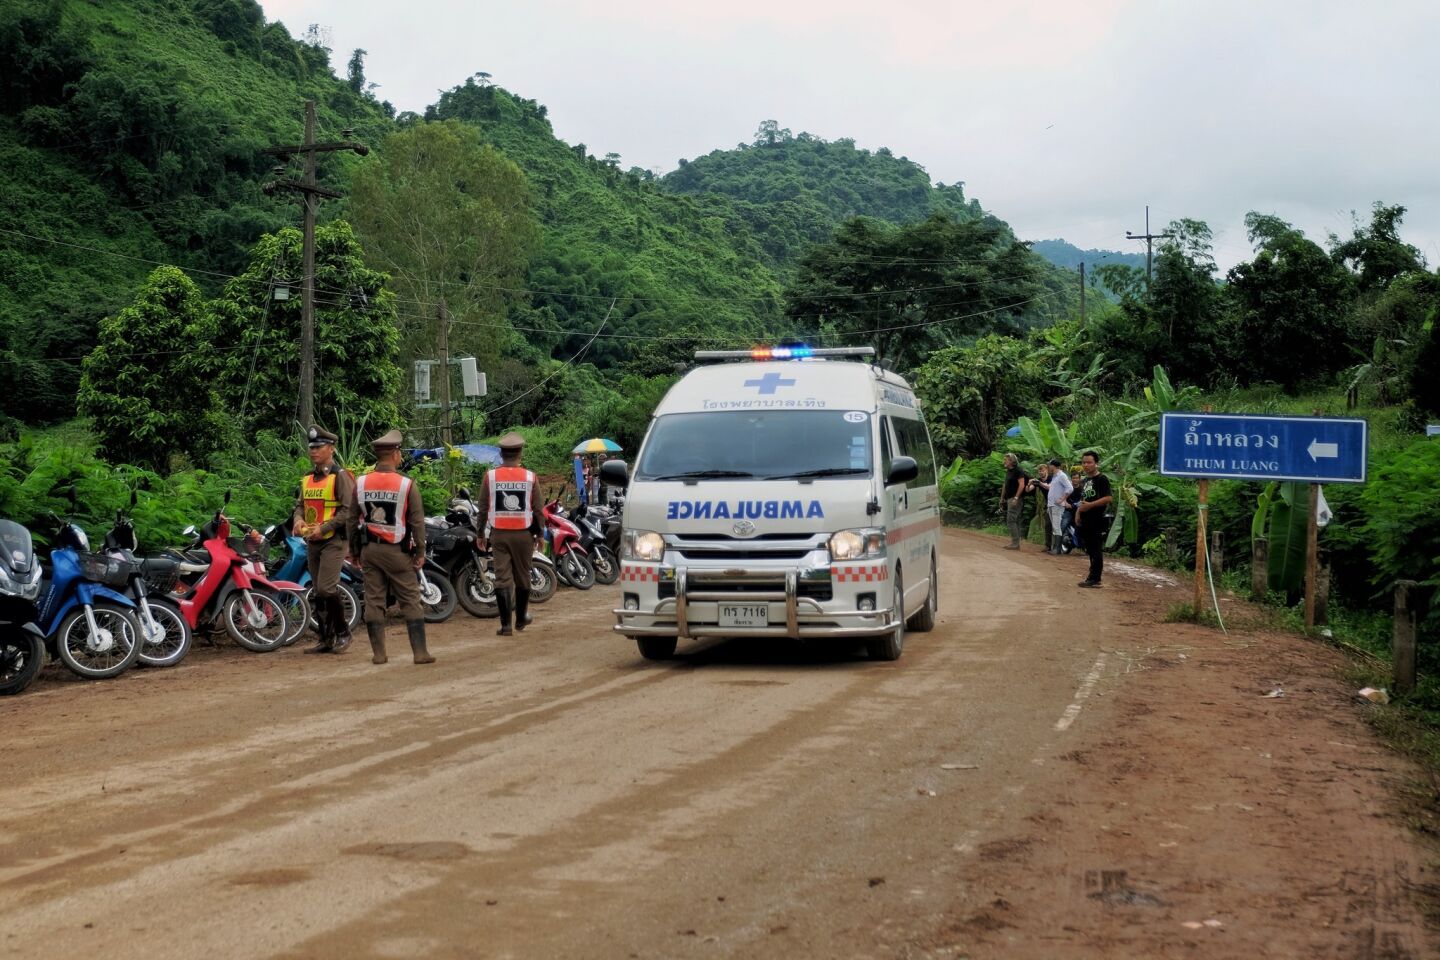 An ambulance leaves the scene near Tham Luang Nang Non cave in the early hours on July 9, 2018 in Chiang Rai, Thailand. Divers began an effort to pull the 12 boys and their soccer coach on Sunday morning after they were found alive in the cave at northern Thailand.